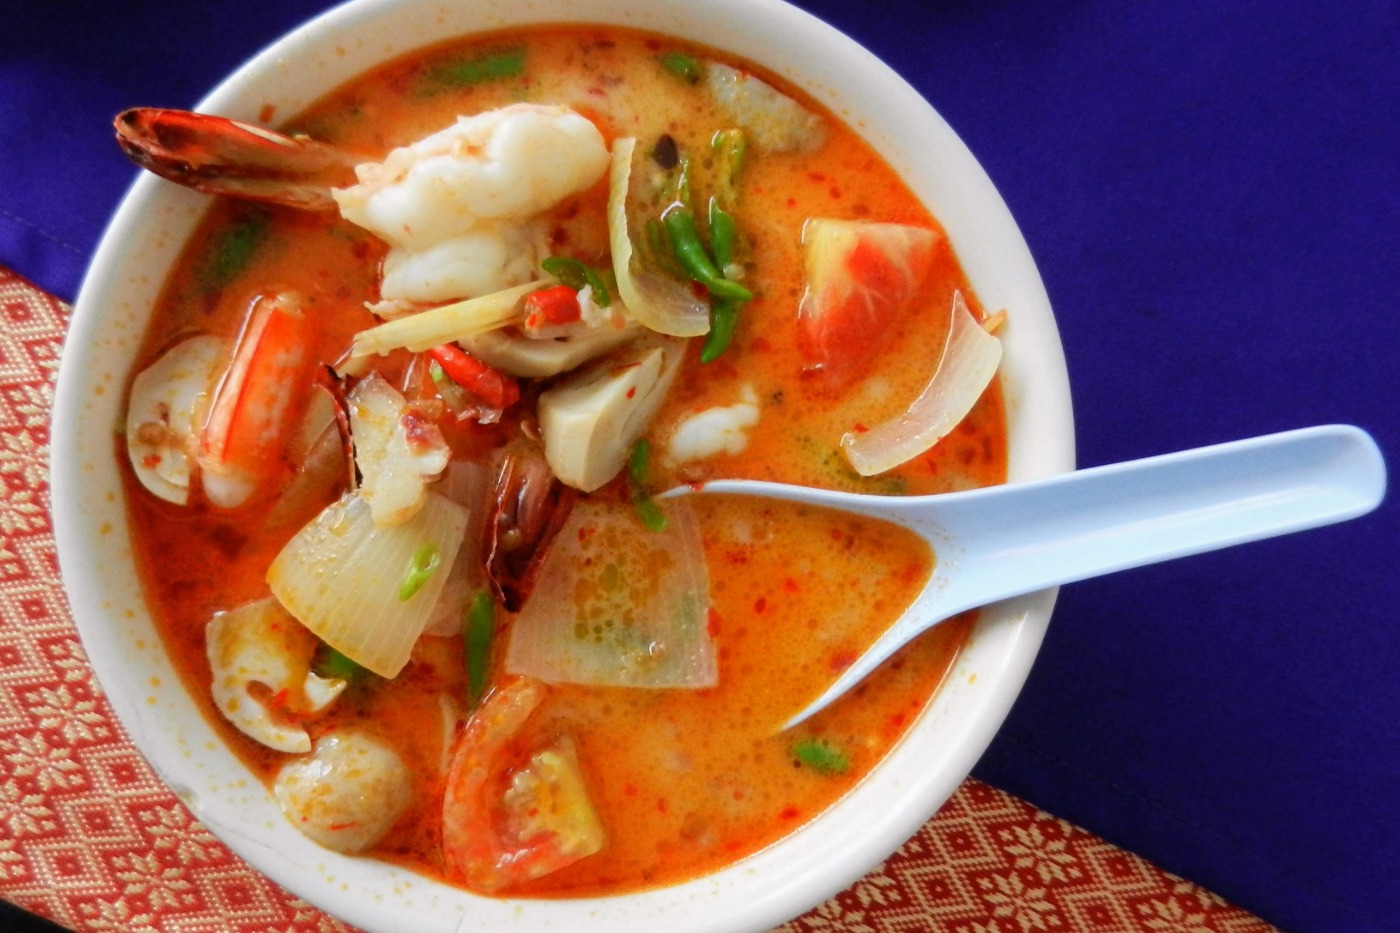 Delicious red Thai curry